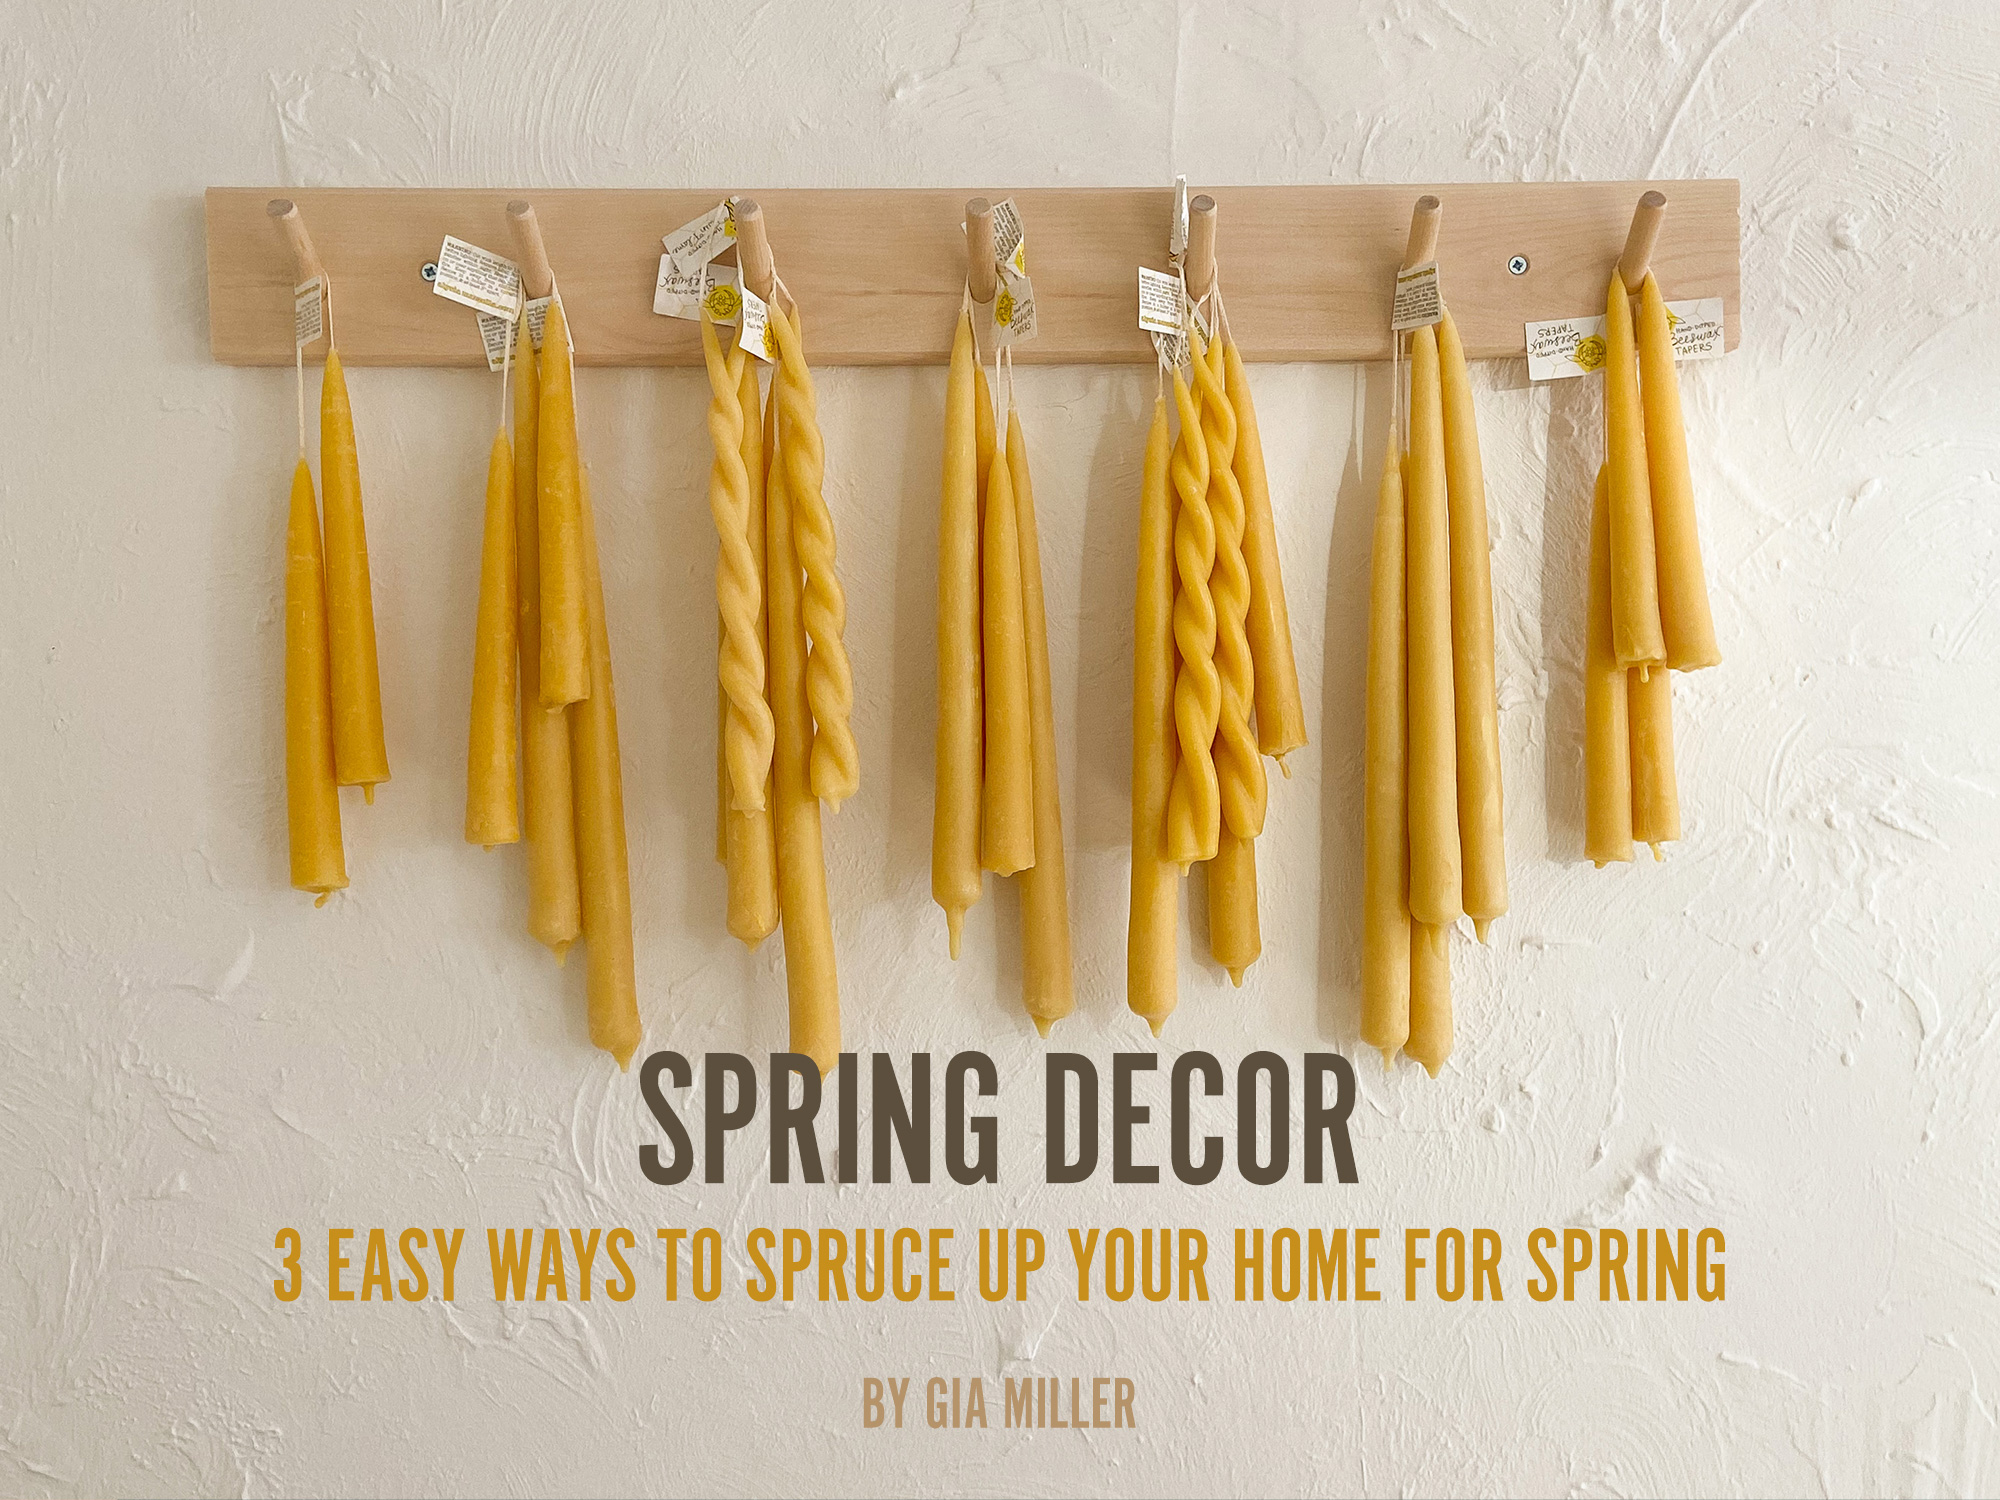 Spring Decor: 3 Easy Ways to Spruce Up Your Home For Spring